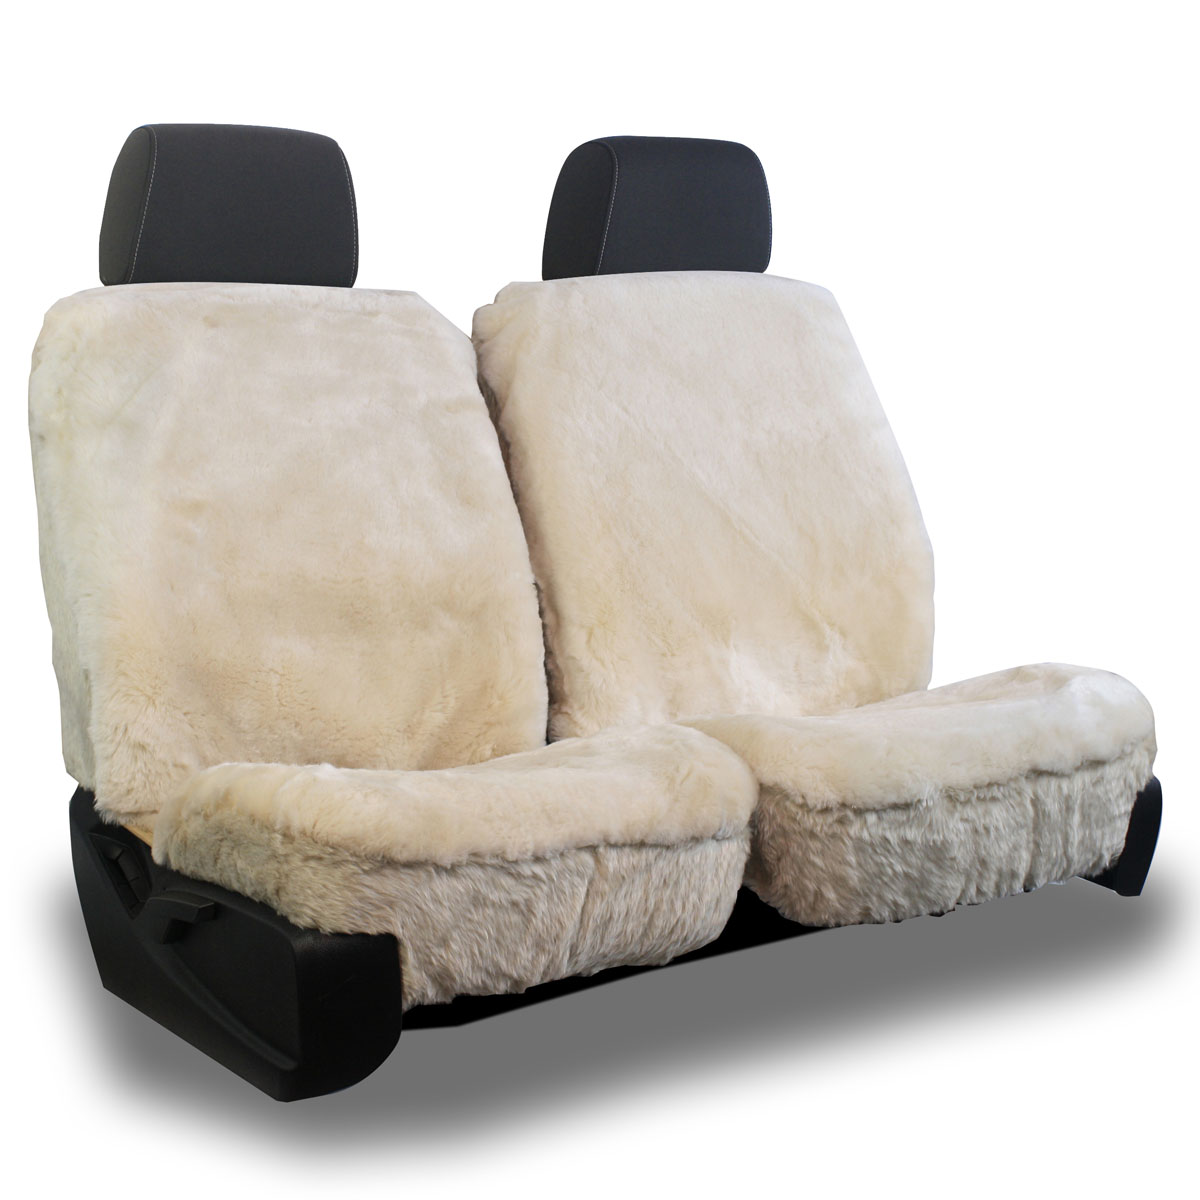 https://autohq.com/images/products/superlamb_universal-sheepskin-seat-cover_sand.jpg